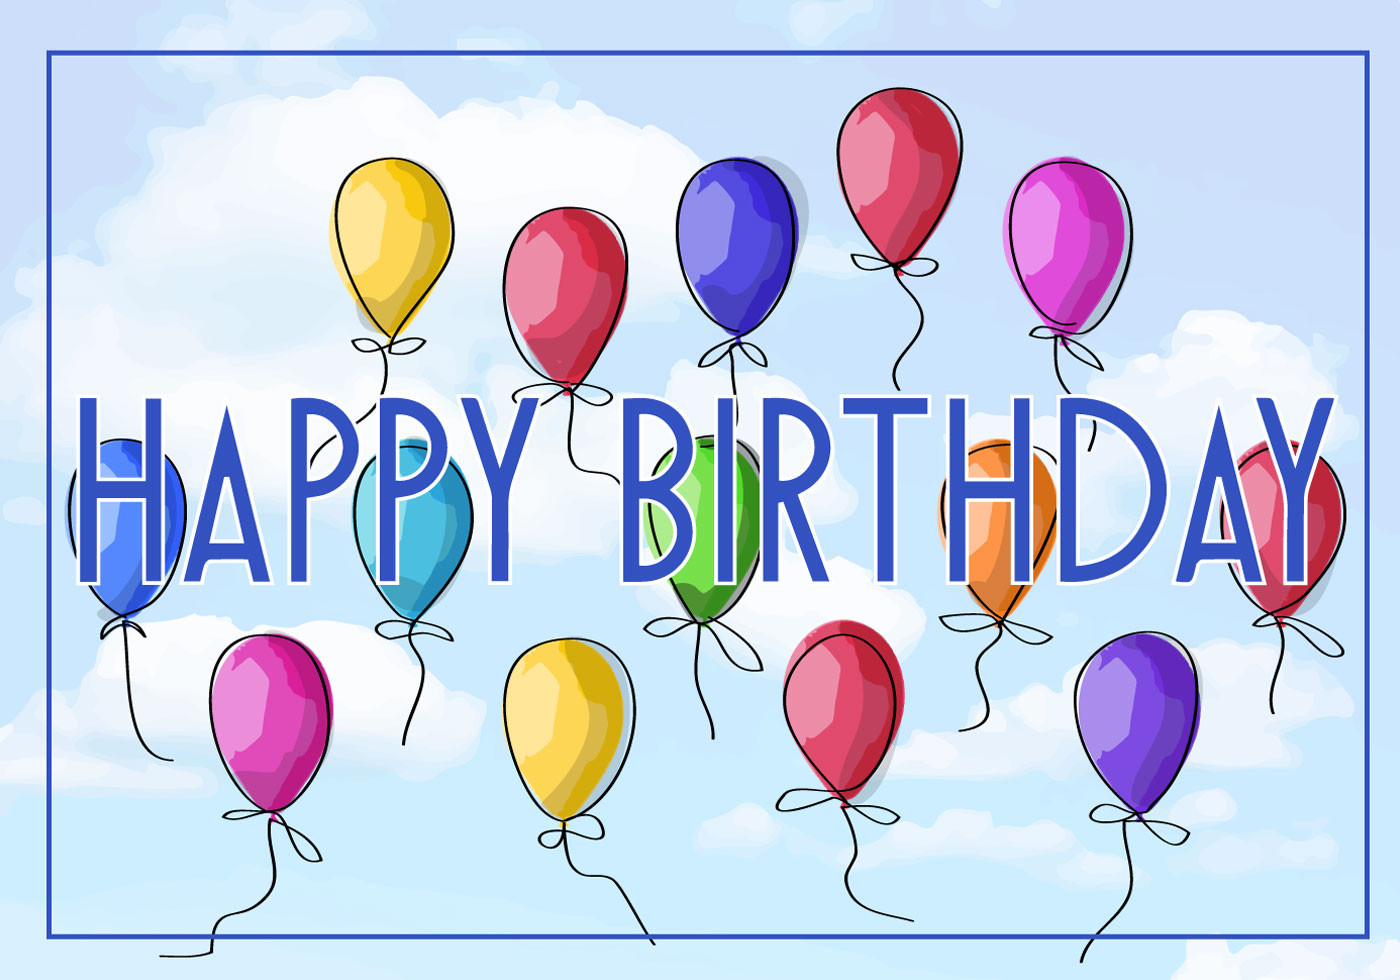 Happy Birthday Wishes Images Free Download
 Free Vector Illustration of a Happy Birthday Greeting Card